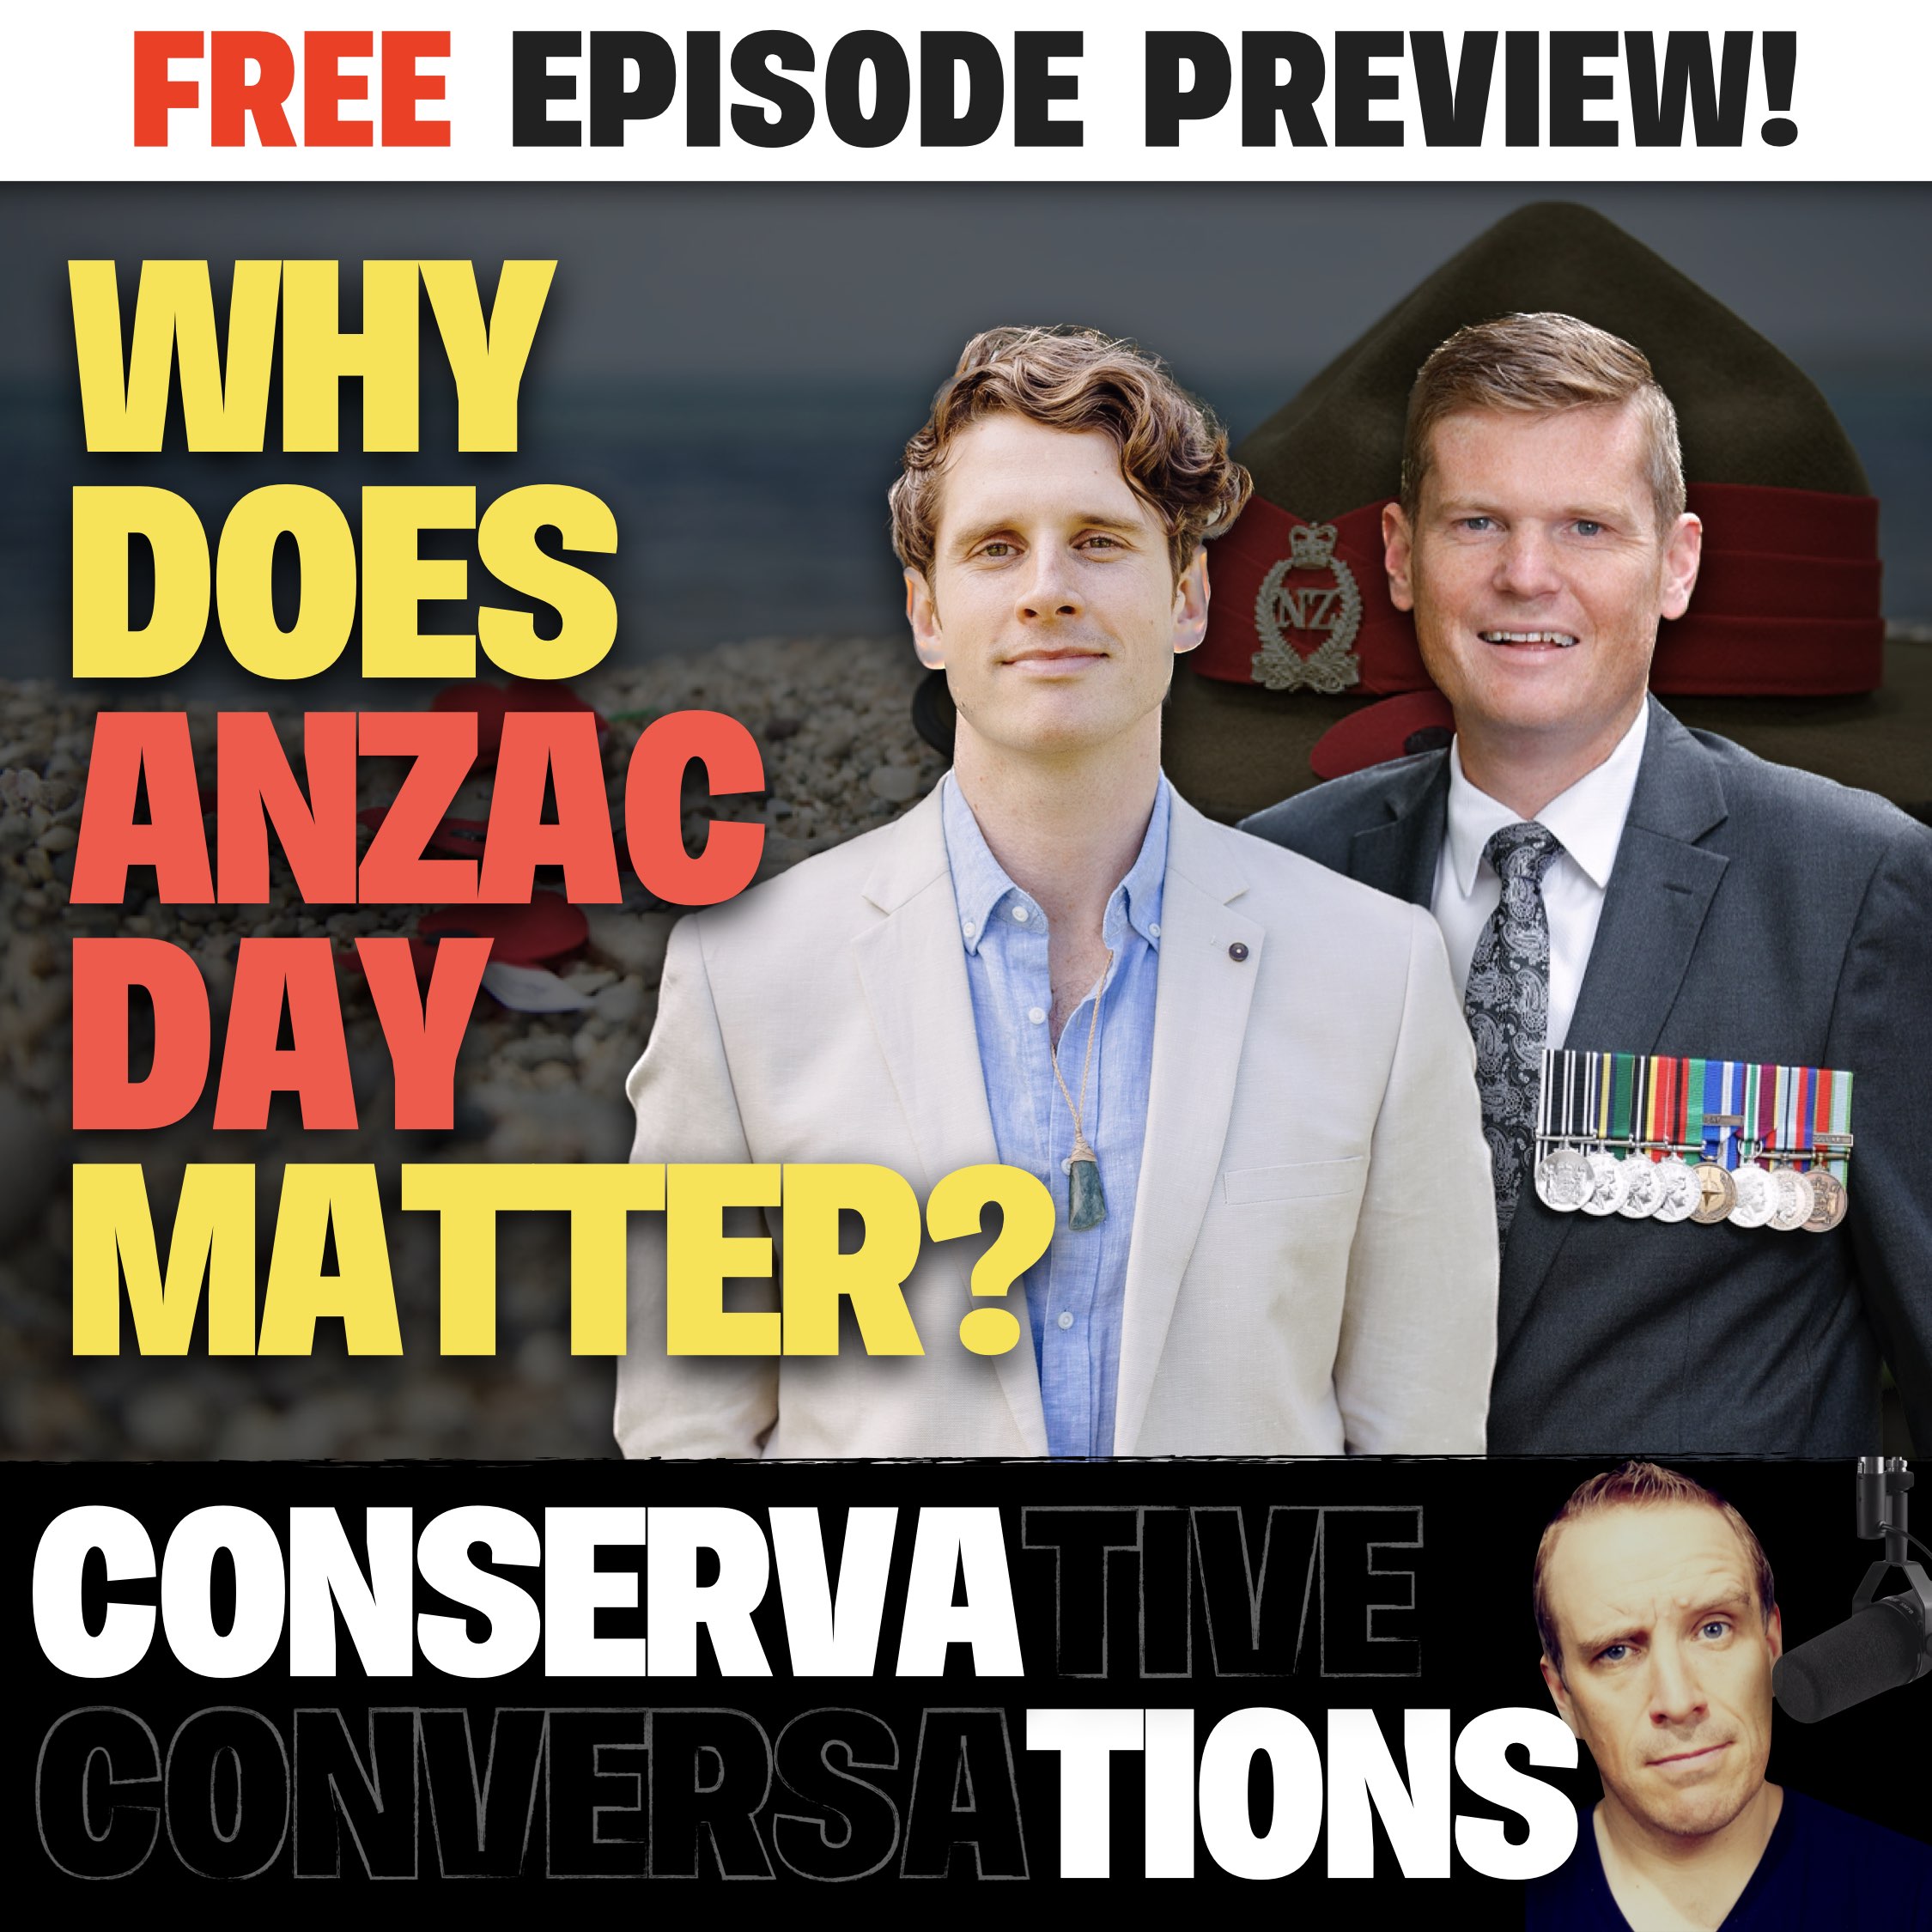 CONSERVATIONS PREVIEW | Why is the ANZAC Tradition so Important?